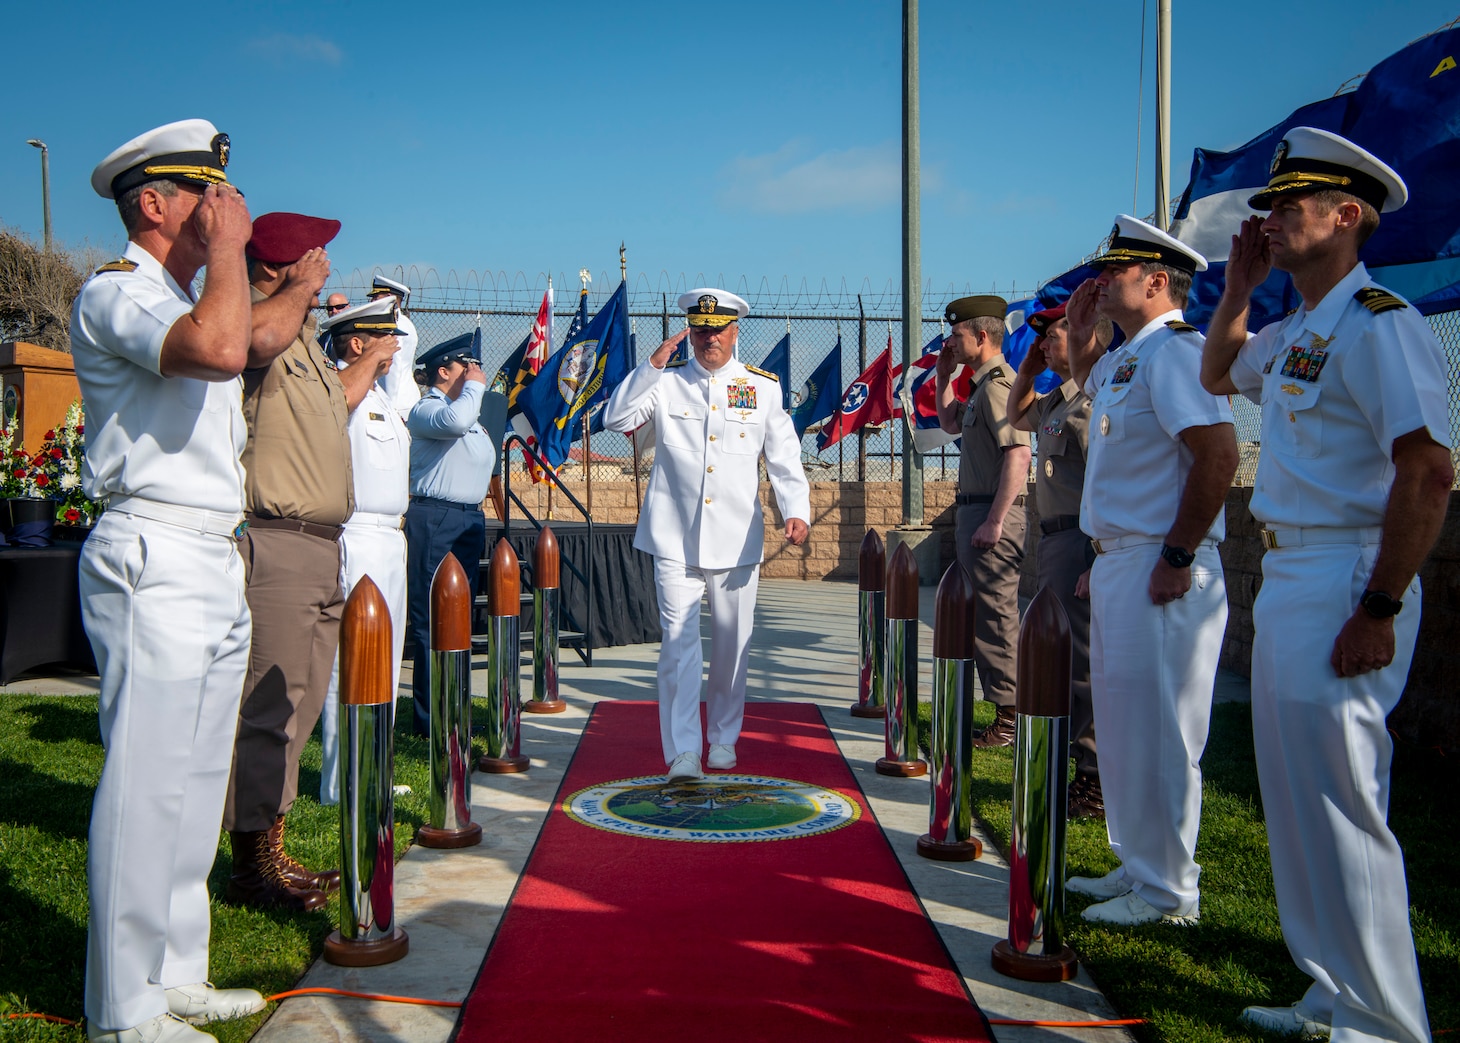 Vice Adm. Collin Green, Deputy Commander of U.S. Special Operations Command, is piped ashore, for the last time, during his retirement ceremony at Naval Special Warfare Command.